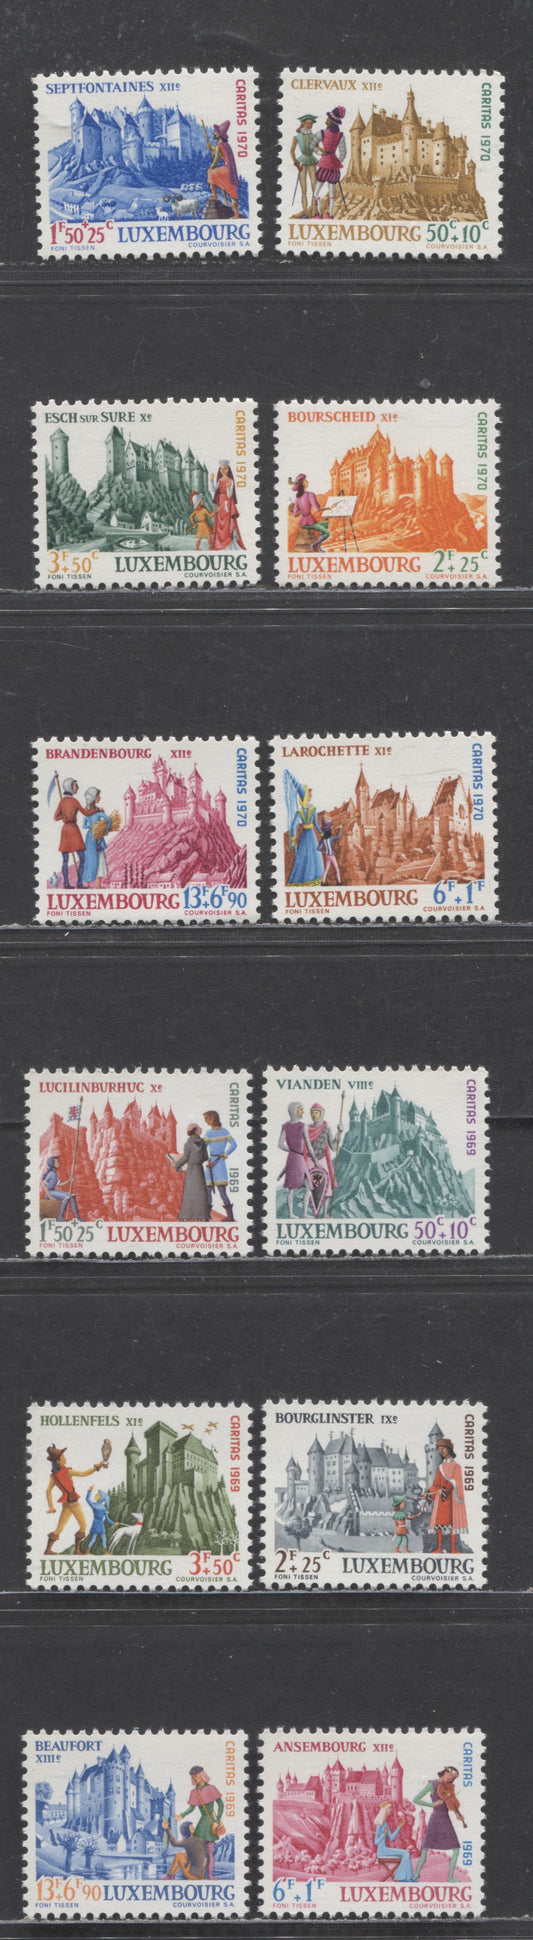 Luxembourg SC#B270-B281 1969-1970 Castles Semi Postals, 12 VFNH Singles, Click on Listing to See ALL Pictures, 2022 Scott Classic Cat. $5.2 USD